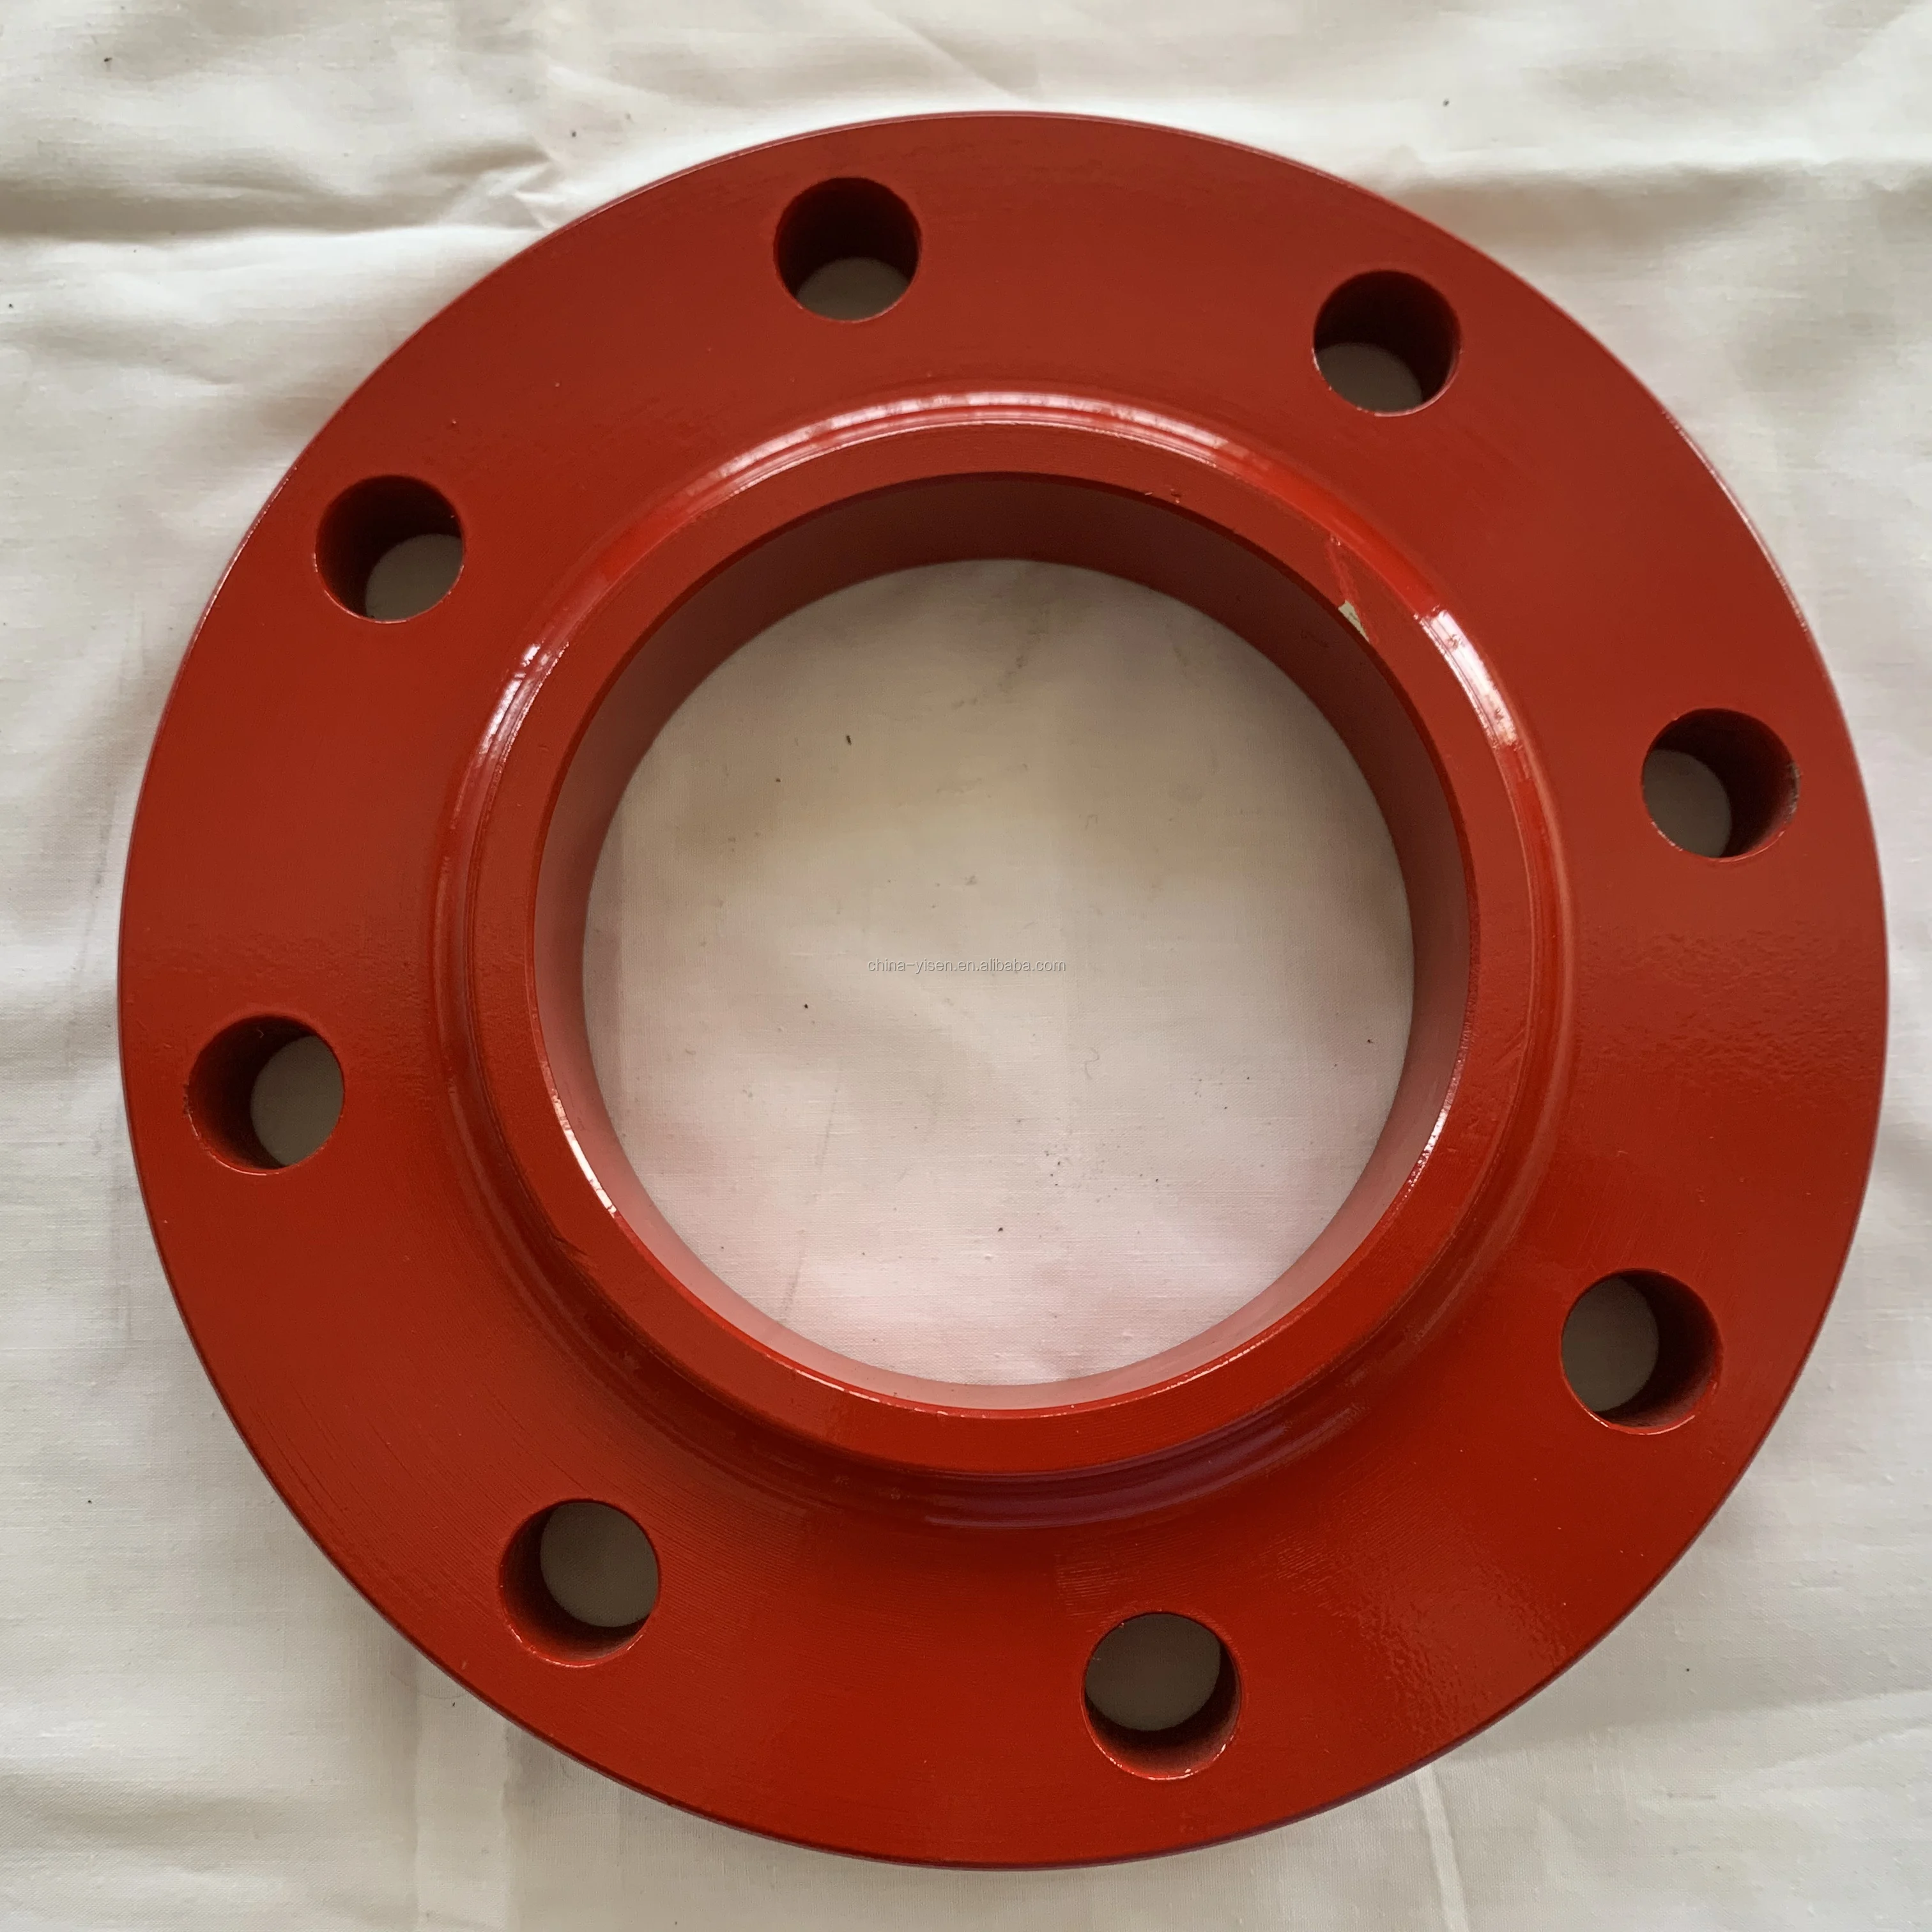 Ansi B165 Cl600 Forged Flanges Stainless Steel Aisi 316316l Slip On Flanges Buy Stainless 3685